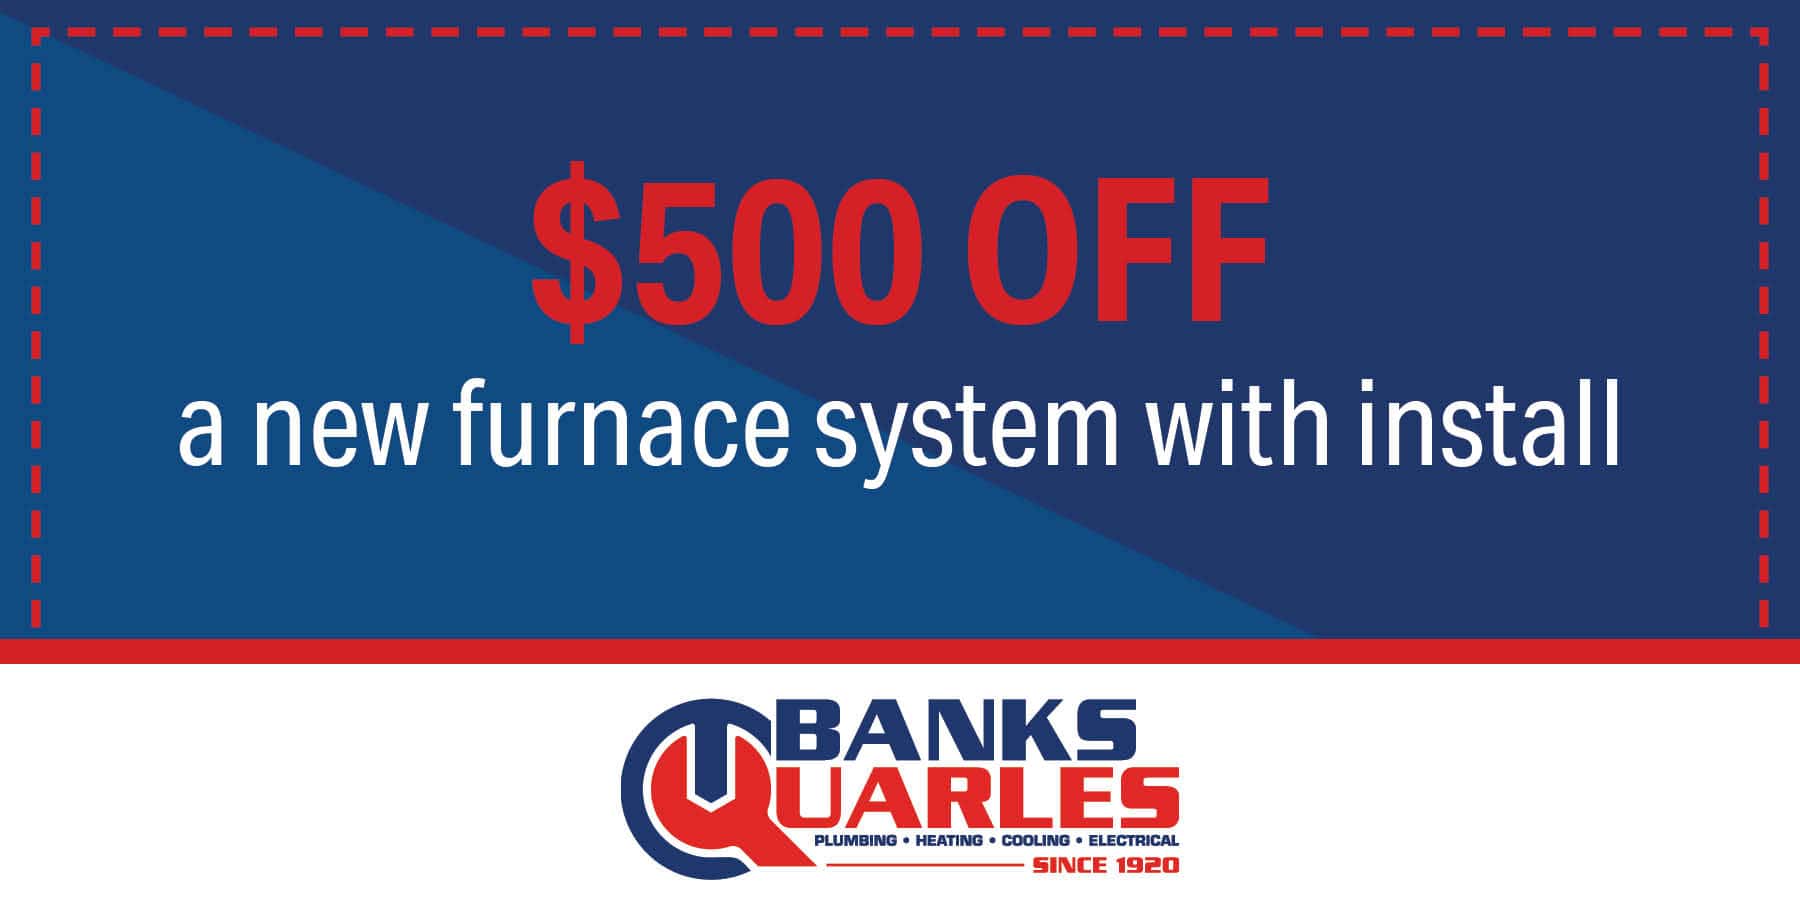 $500 off a new furnace system with install. Offer subject to expire without warning. Contact us for details.